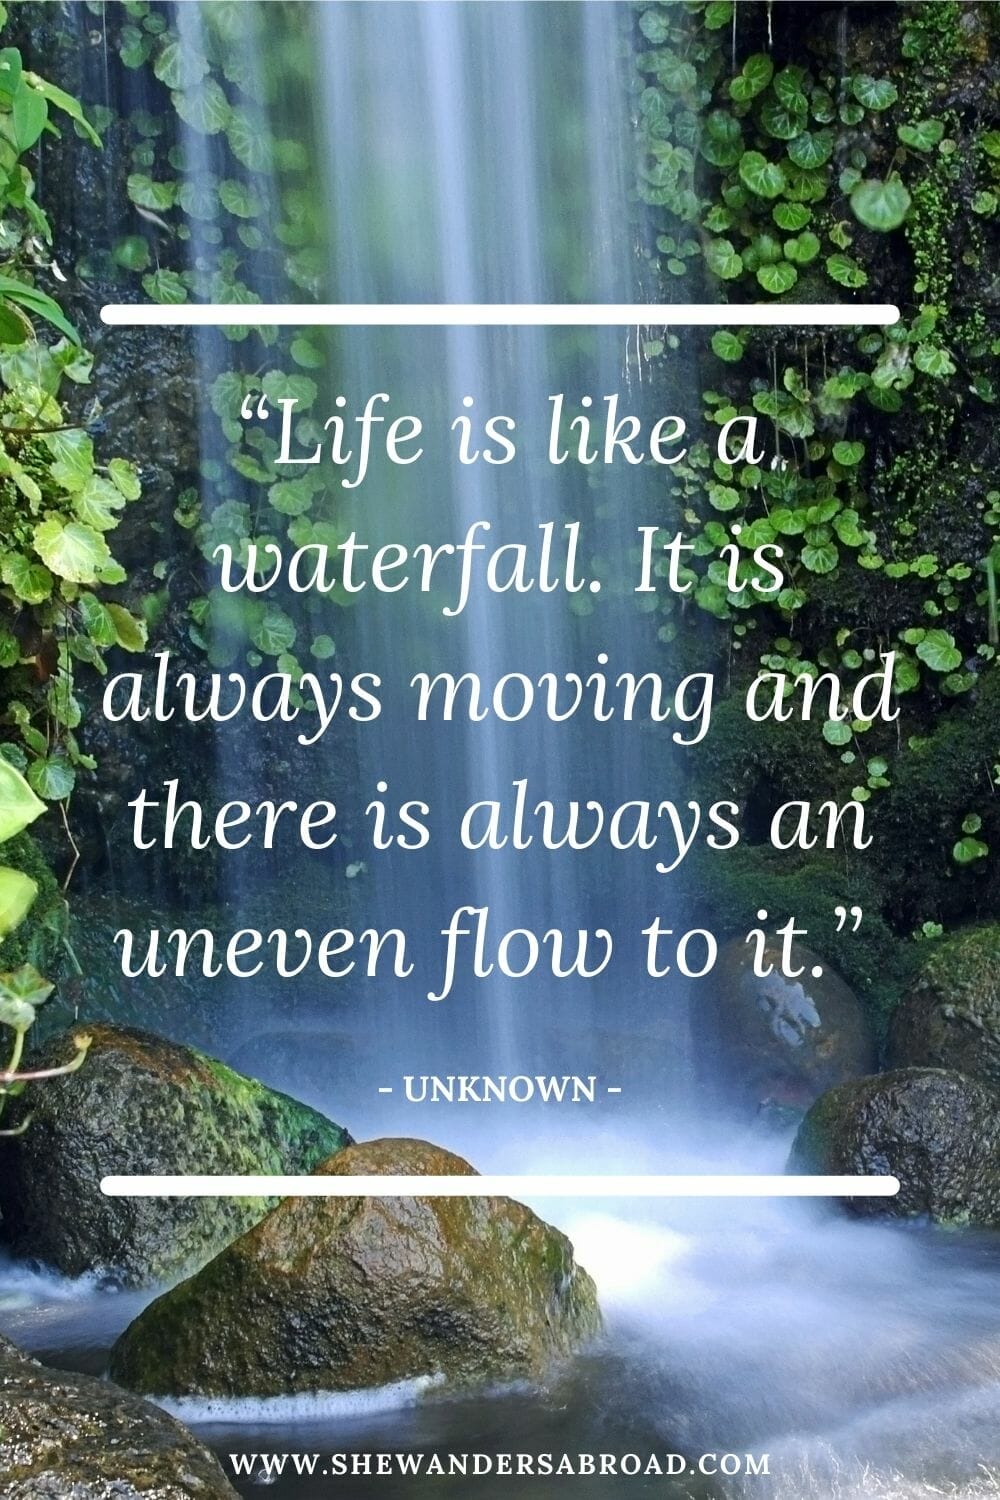 Powerful waterfall quotes for Instagram